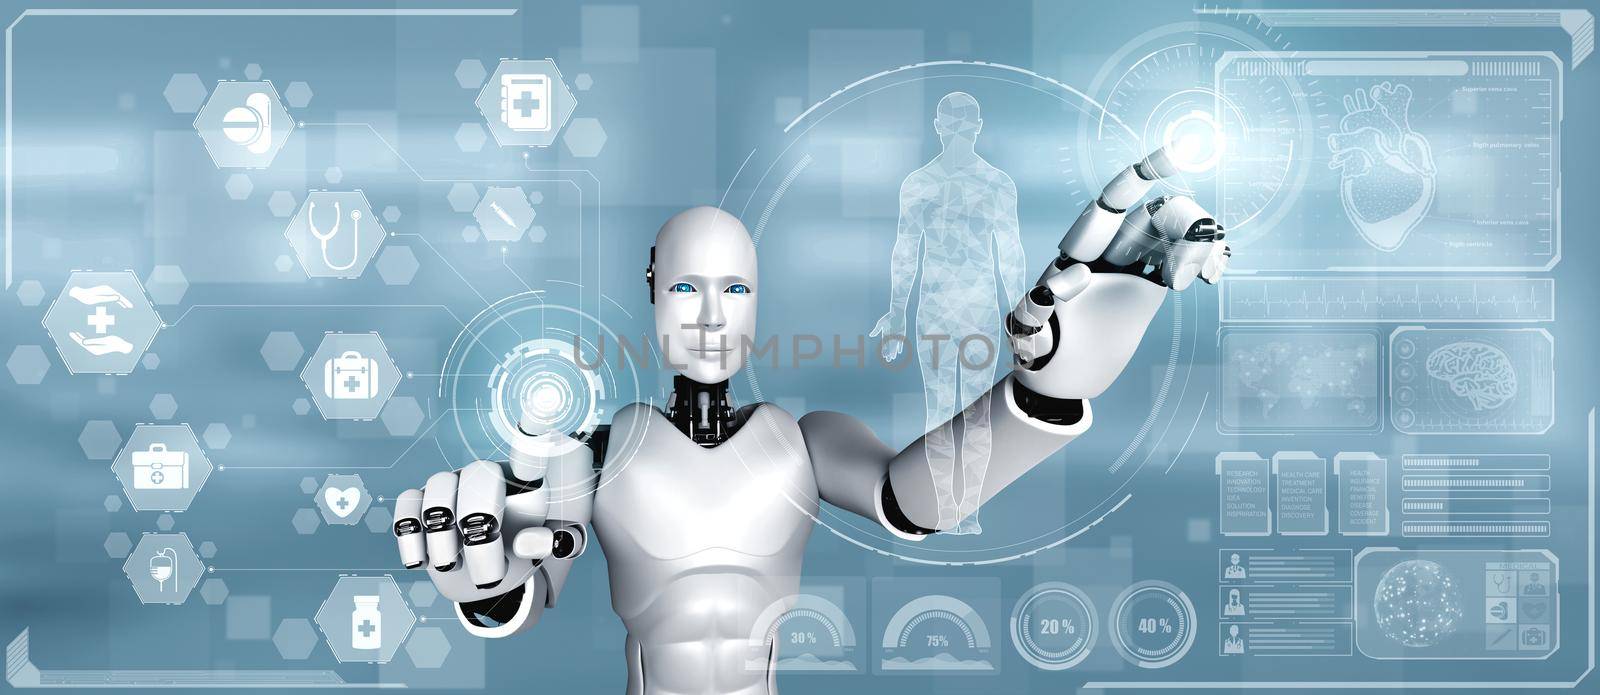 Future medical technology controlled by AI robot using machine learning and artificial intelligence to analyze people health and give advice on health care treatment decision . 3D illustration .